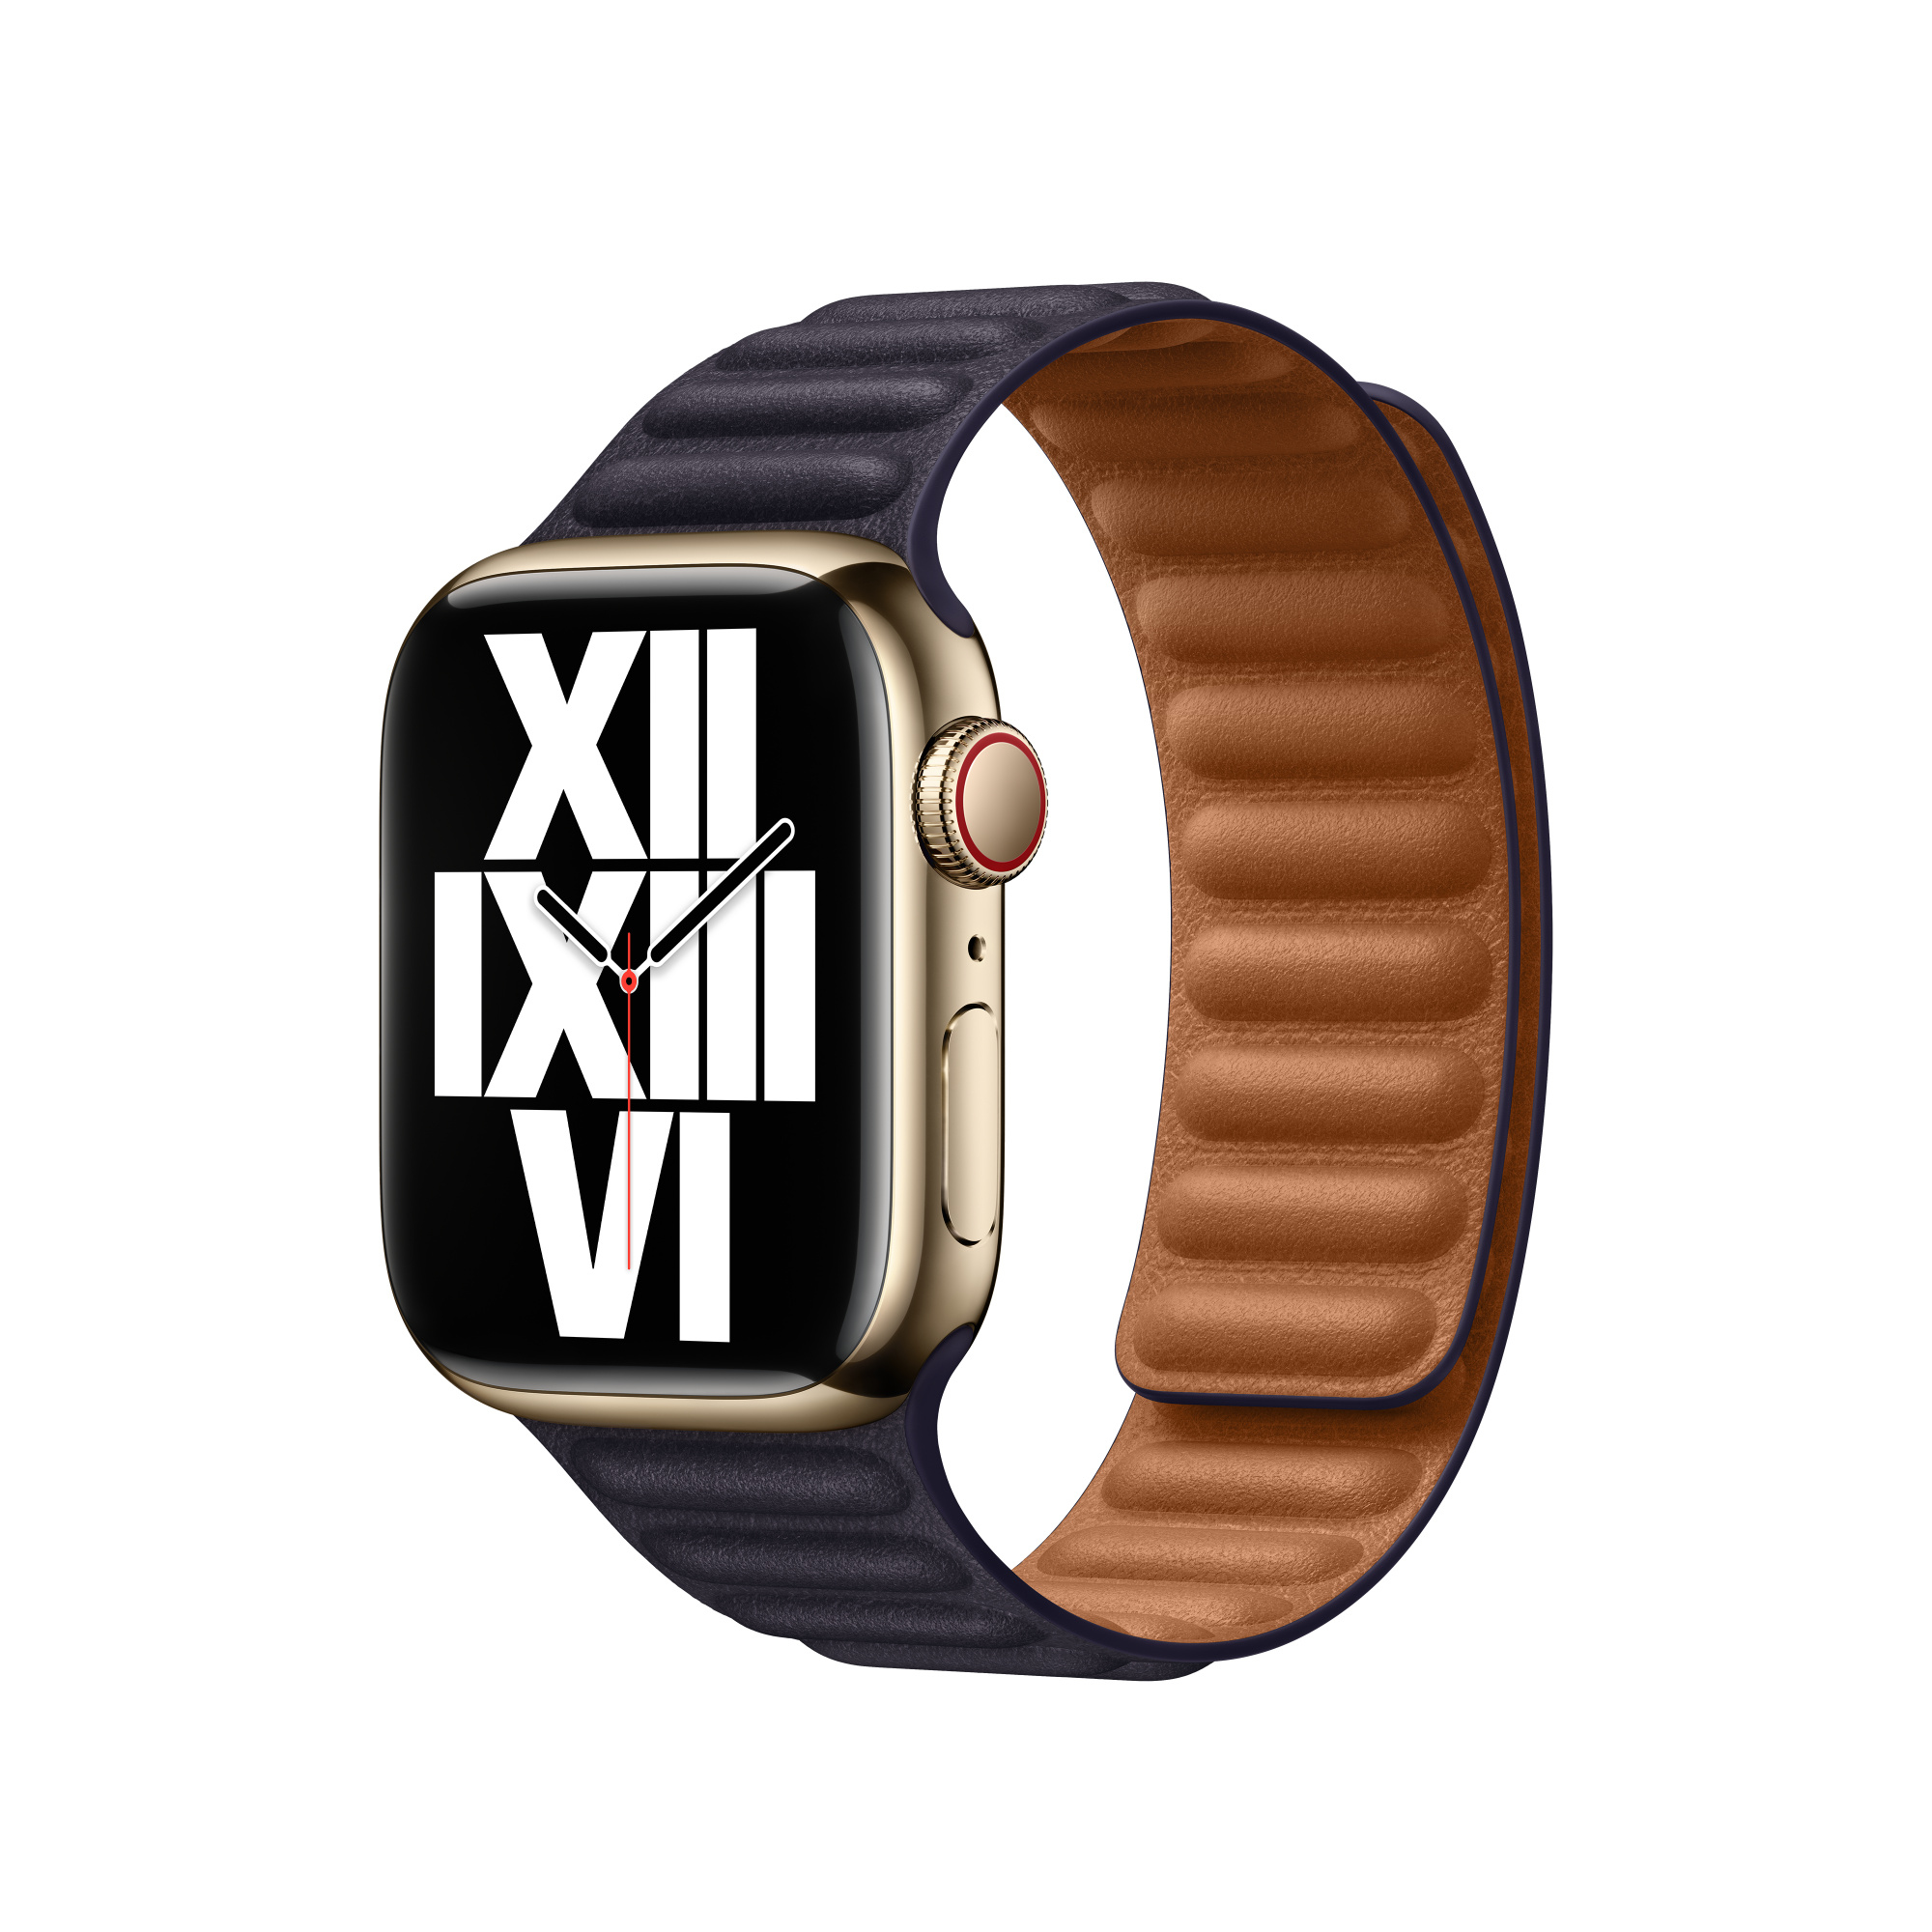 Photos - Smartwatch Band / Strap Apple MP833ZM/A Smart Wearable Accessories Band Violet Leather 